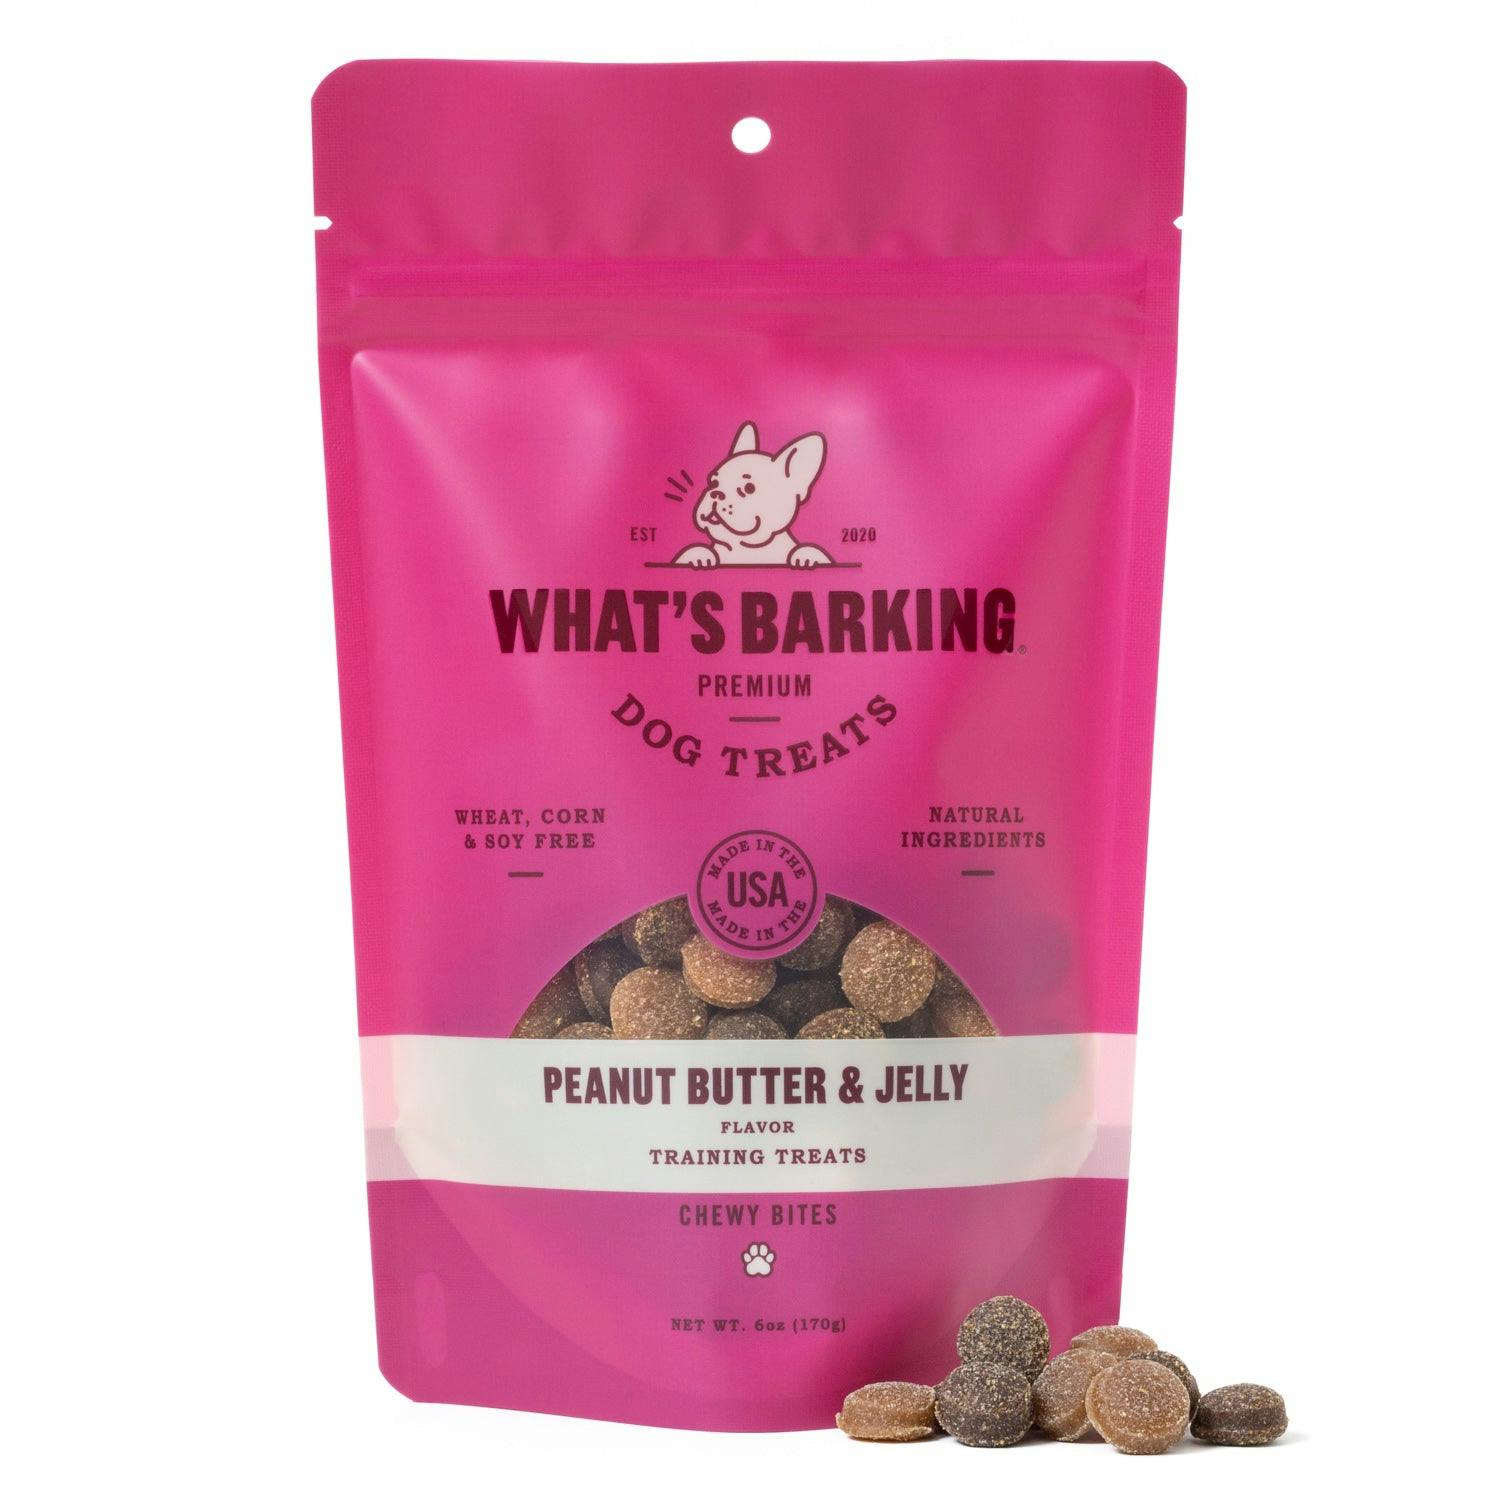 What's Barking Peanut Butter & Jelly Chewy Training Treats - Image 0